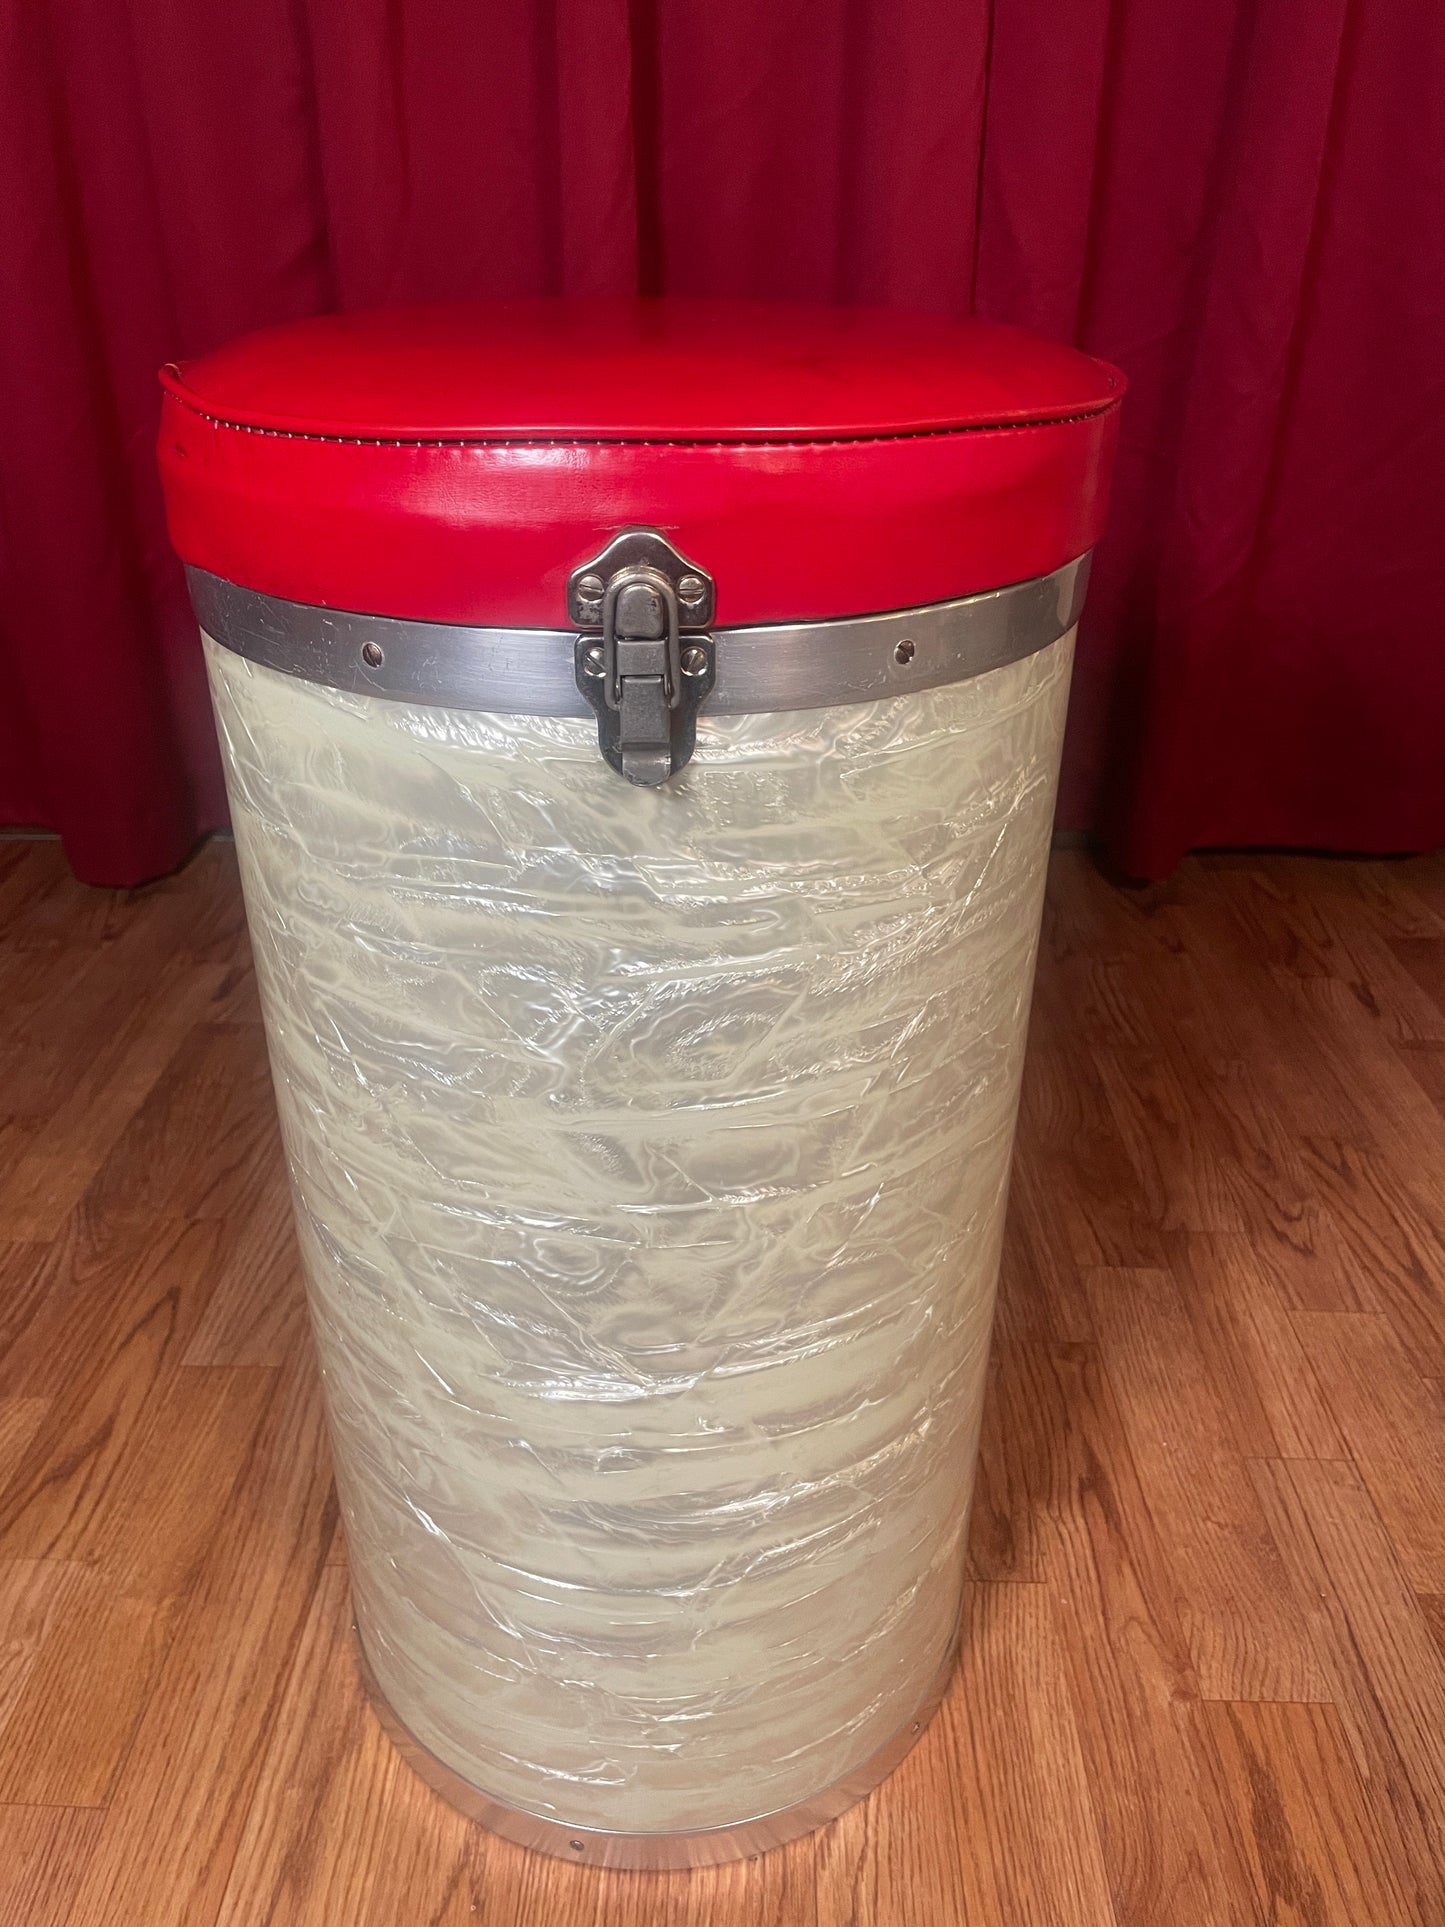 Vintage 1960s Ludwig No. 1027 Canister Throne White Marine Pearl w/ Red Top Seat Case